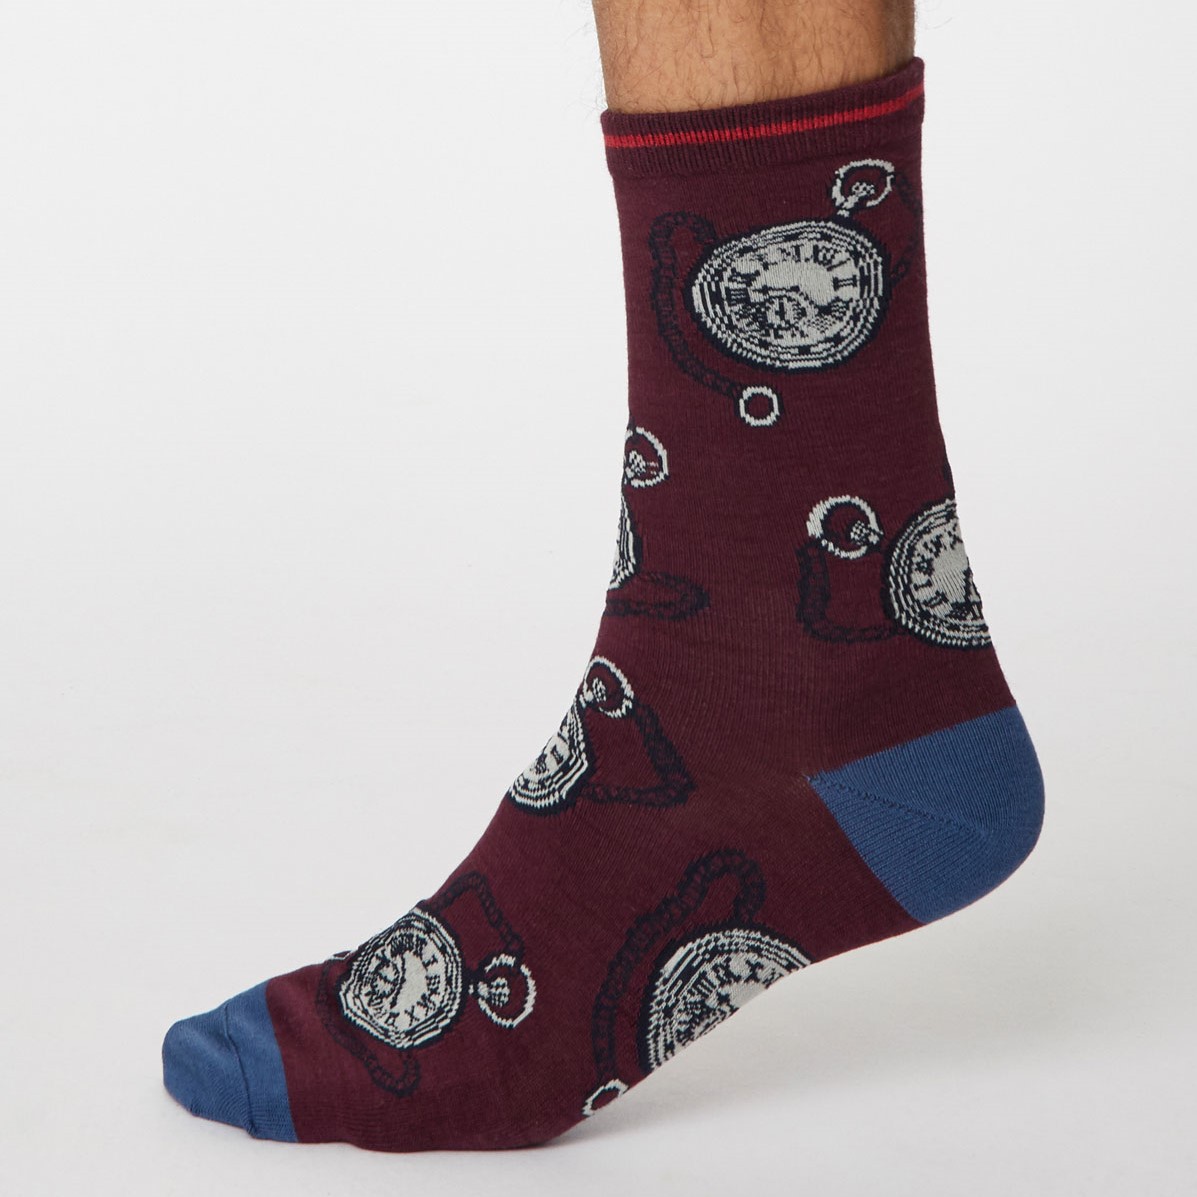 Thought Watch Design Socks